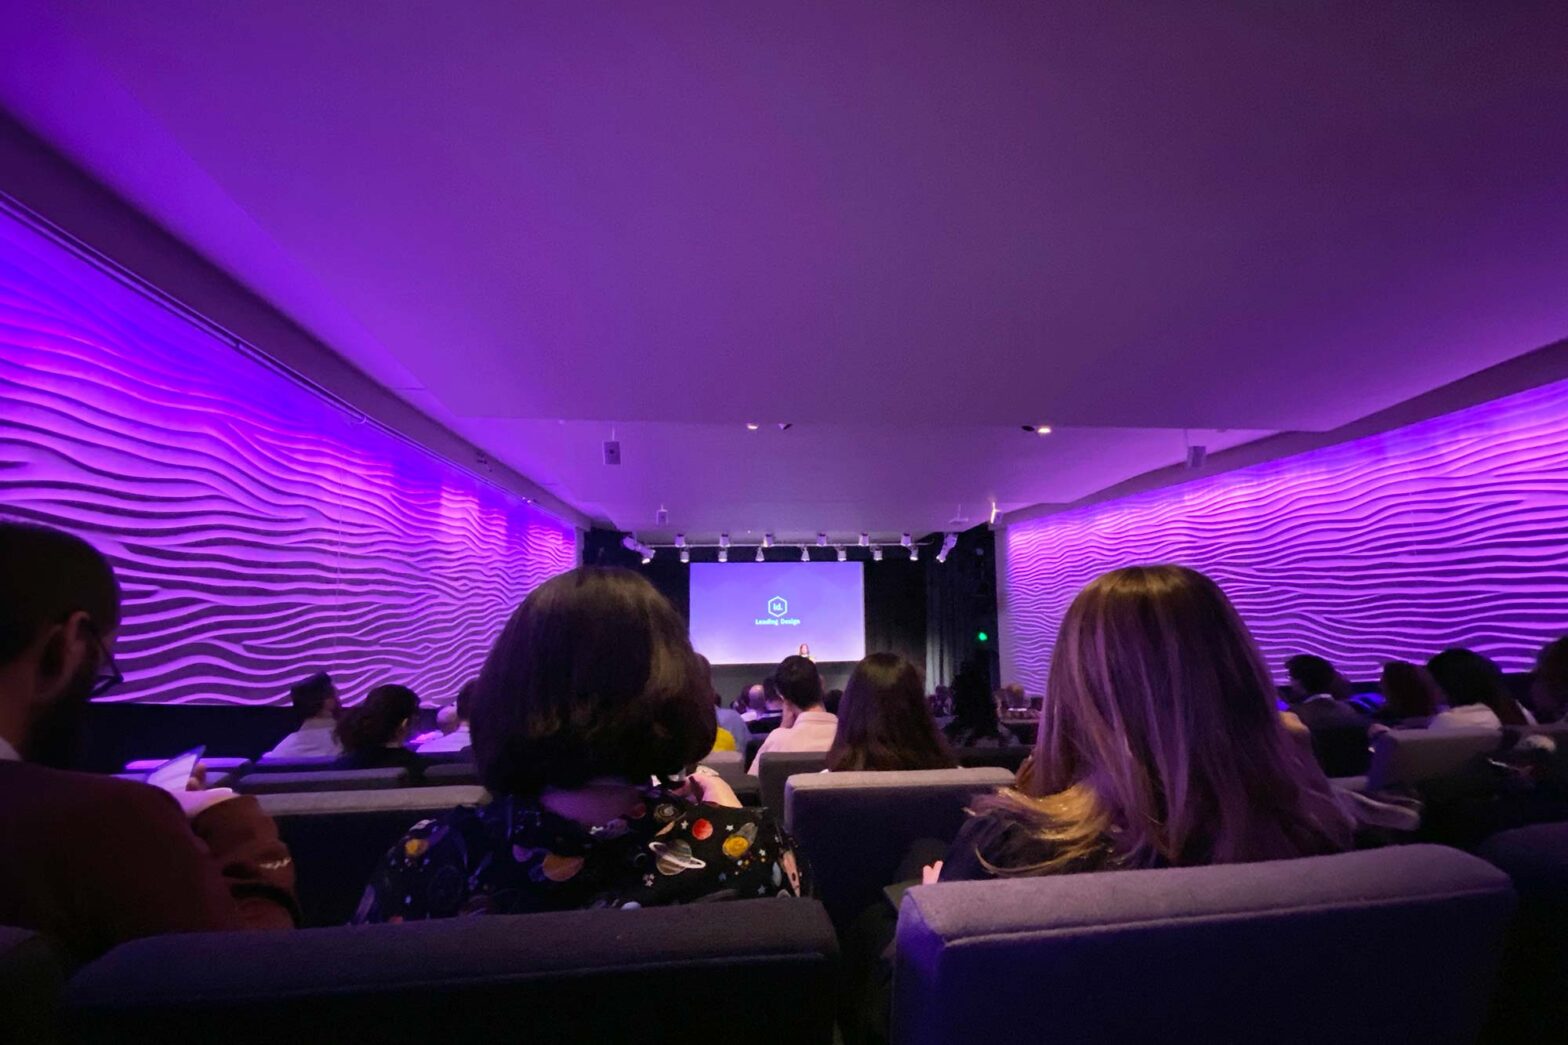 A cinema-like room with purple light, people sitting in many rows, 2 people with longer hair just in front of the camera and a small logo is projected at the end of room saying LD – leading design